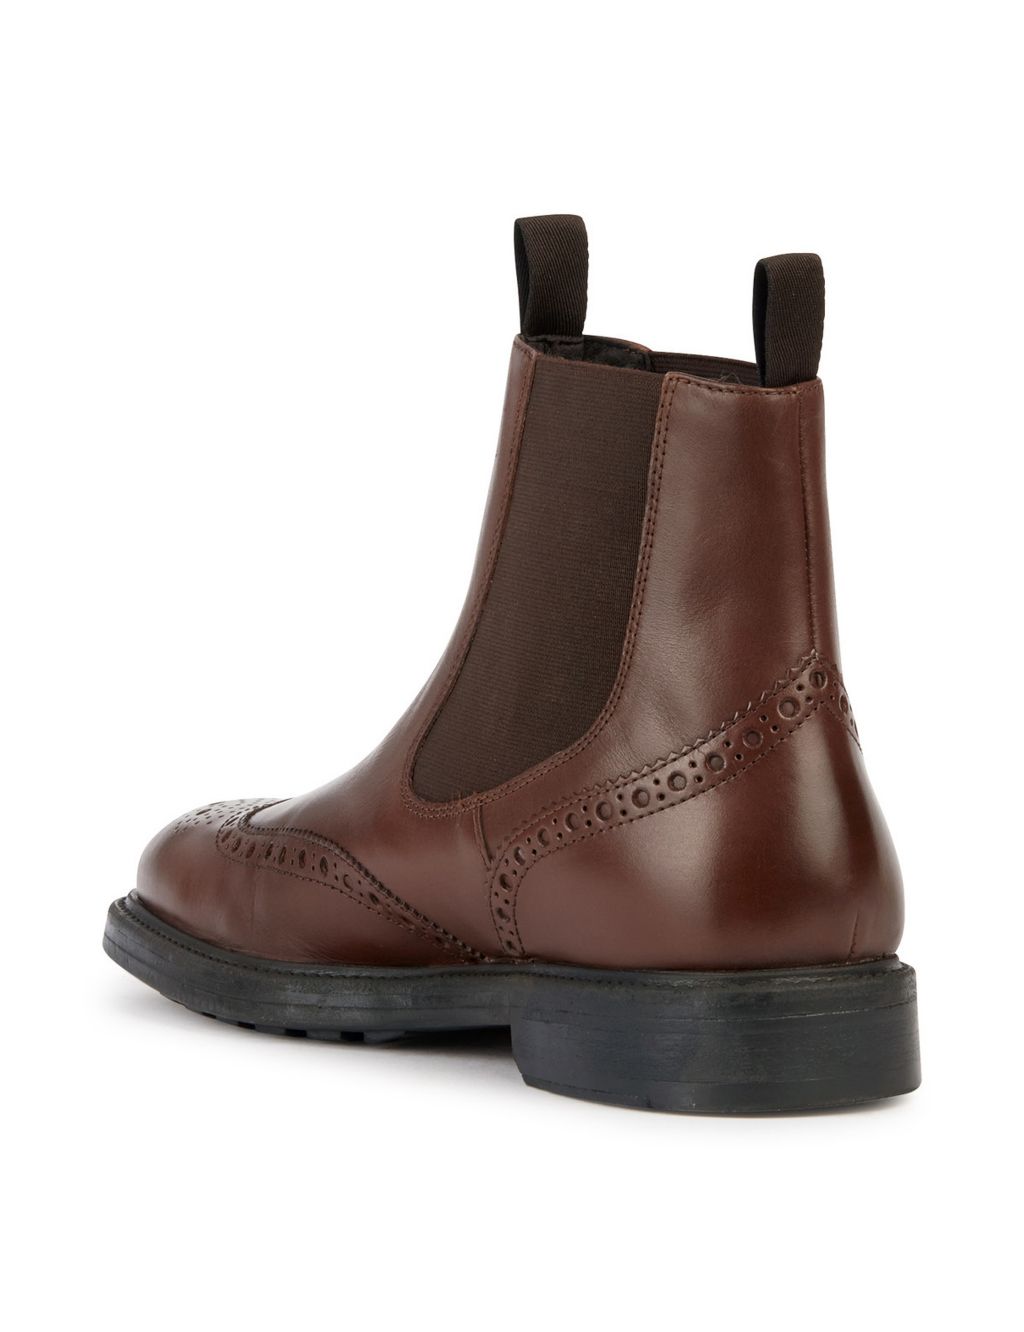 Wide Fit Leather Pull-On Chelsea Boots image 3